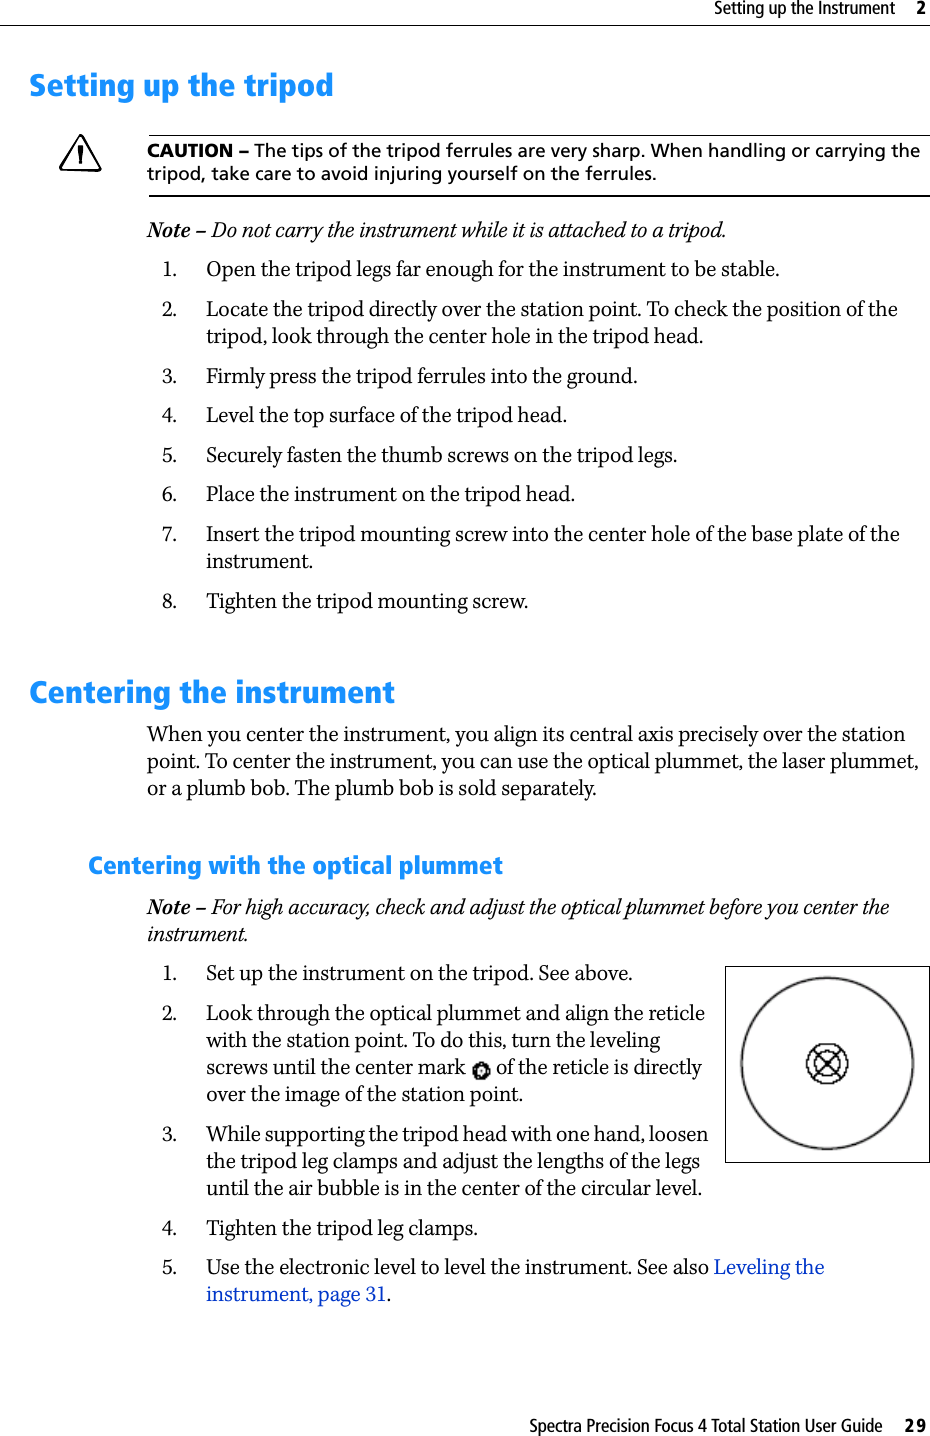 Spectra Precision Focus 4 Total Station User Guide     29Setting up the Instrument     2Setting up the tripodCCAUTION – The tips of the tripod ferrules are very sharp. When handling or carrying the tripod, take care to avoid injuring yourself on the ferrules.Note – Do not carry the instrument while it is attached to a tripod.1. Open the tripod legs far enough for the instrument to be stable.2. Locate the tripod directly over the station point. To check the position of the tripod, look through the center hole in the tripod head.3. Firmly press the tripod ferrules into the ground.4. Level the top surface of the tripod head.5. Securely fasten the thumb screws on the tripod legs.6. Place the instrument on the tripod head.7. Insert the tripod mounting screw into the center hole of the base plate of the instrument.8. Tighten the tripod mounting screw.Centering the instrumentWhen you center the instrument, you align its central axis precisely over the station point. To center the instrument, you can use the optical plummet, the laser plummet, or a plumb bob. The plumb bob is sold separately.Centering with the optical plummetNote – For high accuracy, check and adjust the optical plummet before you center the instrument. 1. Set up the instrument on the tripod. See above.2. Look through the optical plummet and align the reticle with the station point. To do this, turn the leveling screws until the center mark   of the reticle is directly over the image of the station point.3. While supporting the tripod head with one hand, loosen the tripod leg clamps and adjust the lengths of the legs until the air bubble is in the center of the circular level. 4. Tighten the tripod leg clamps.5. Use the electronic level to level the instrument. See also Leveling the instrument, page 31. 